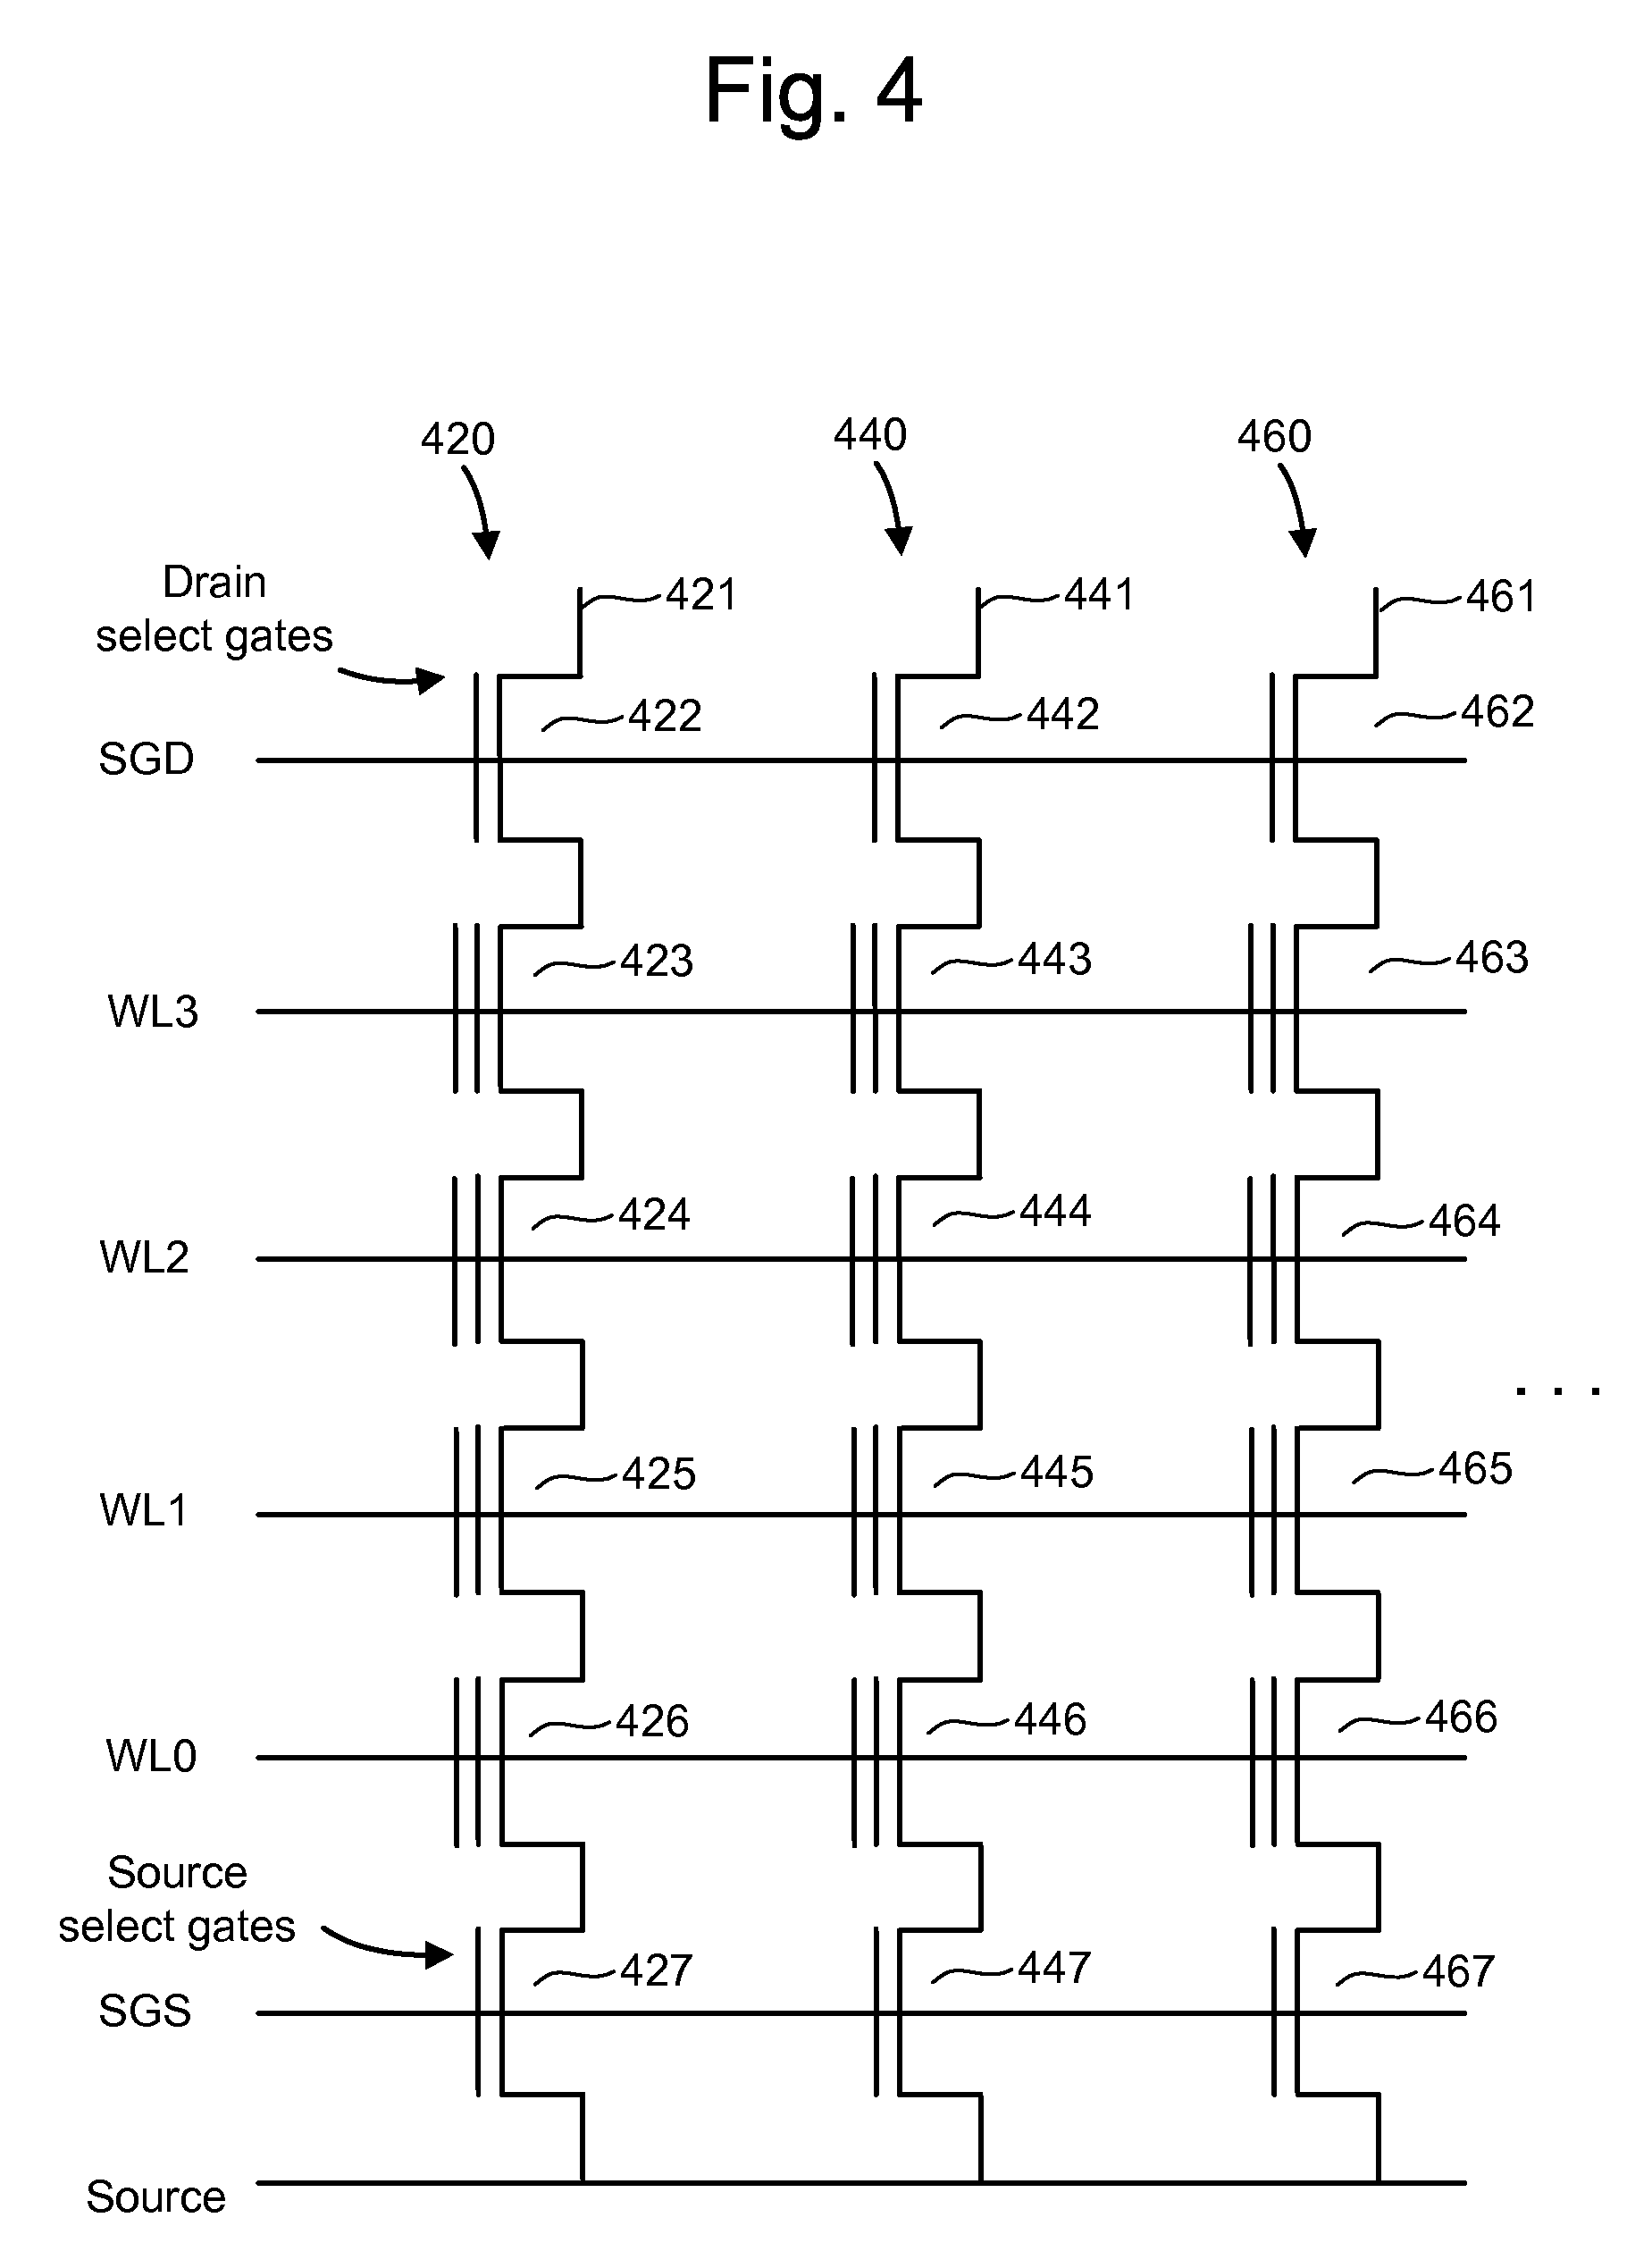 System for non-real time reprogramming of non-volatile memory to achieve tighter distribution of threshold voltages